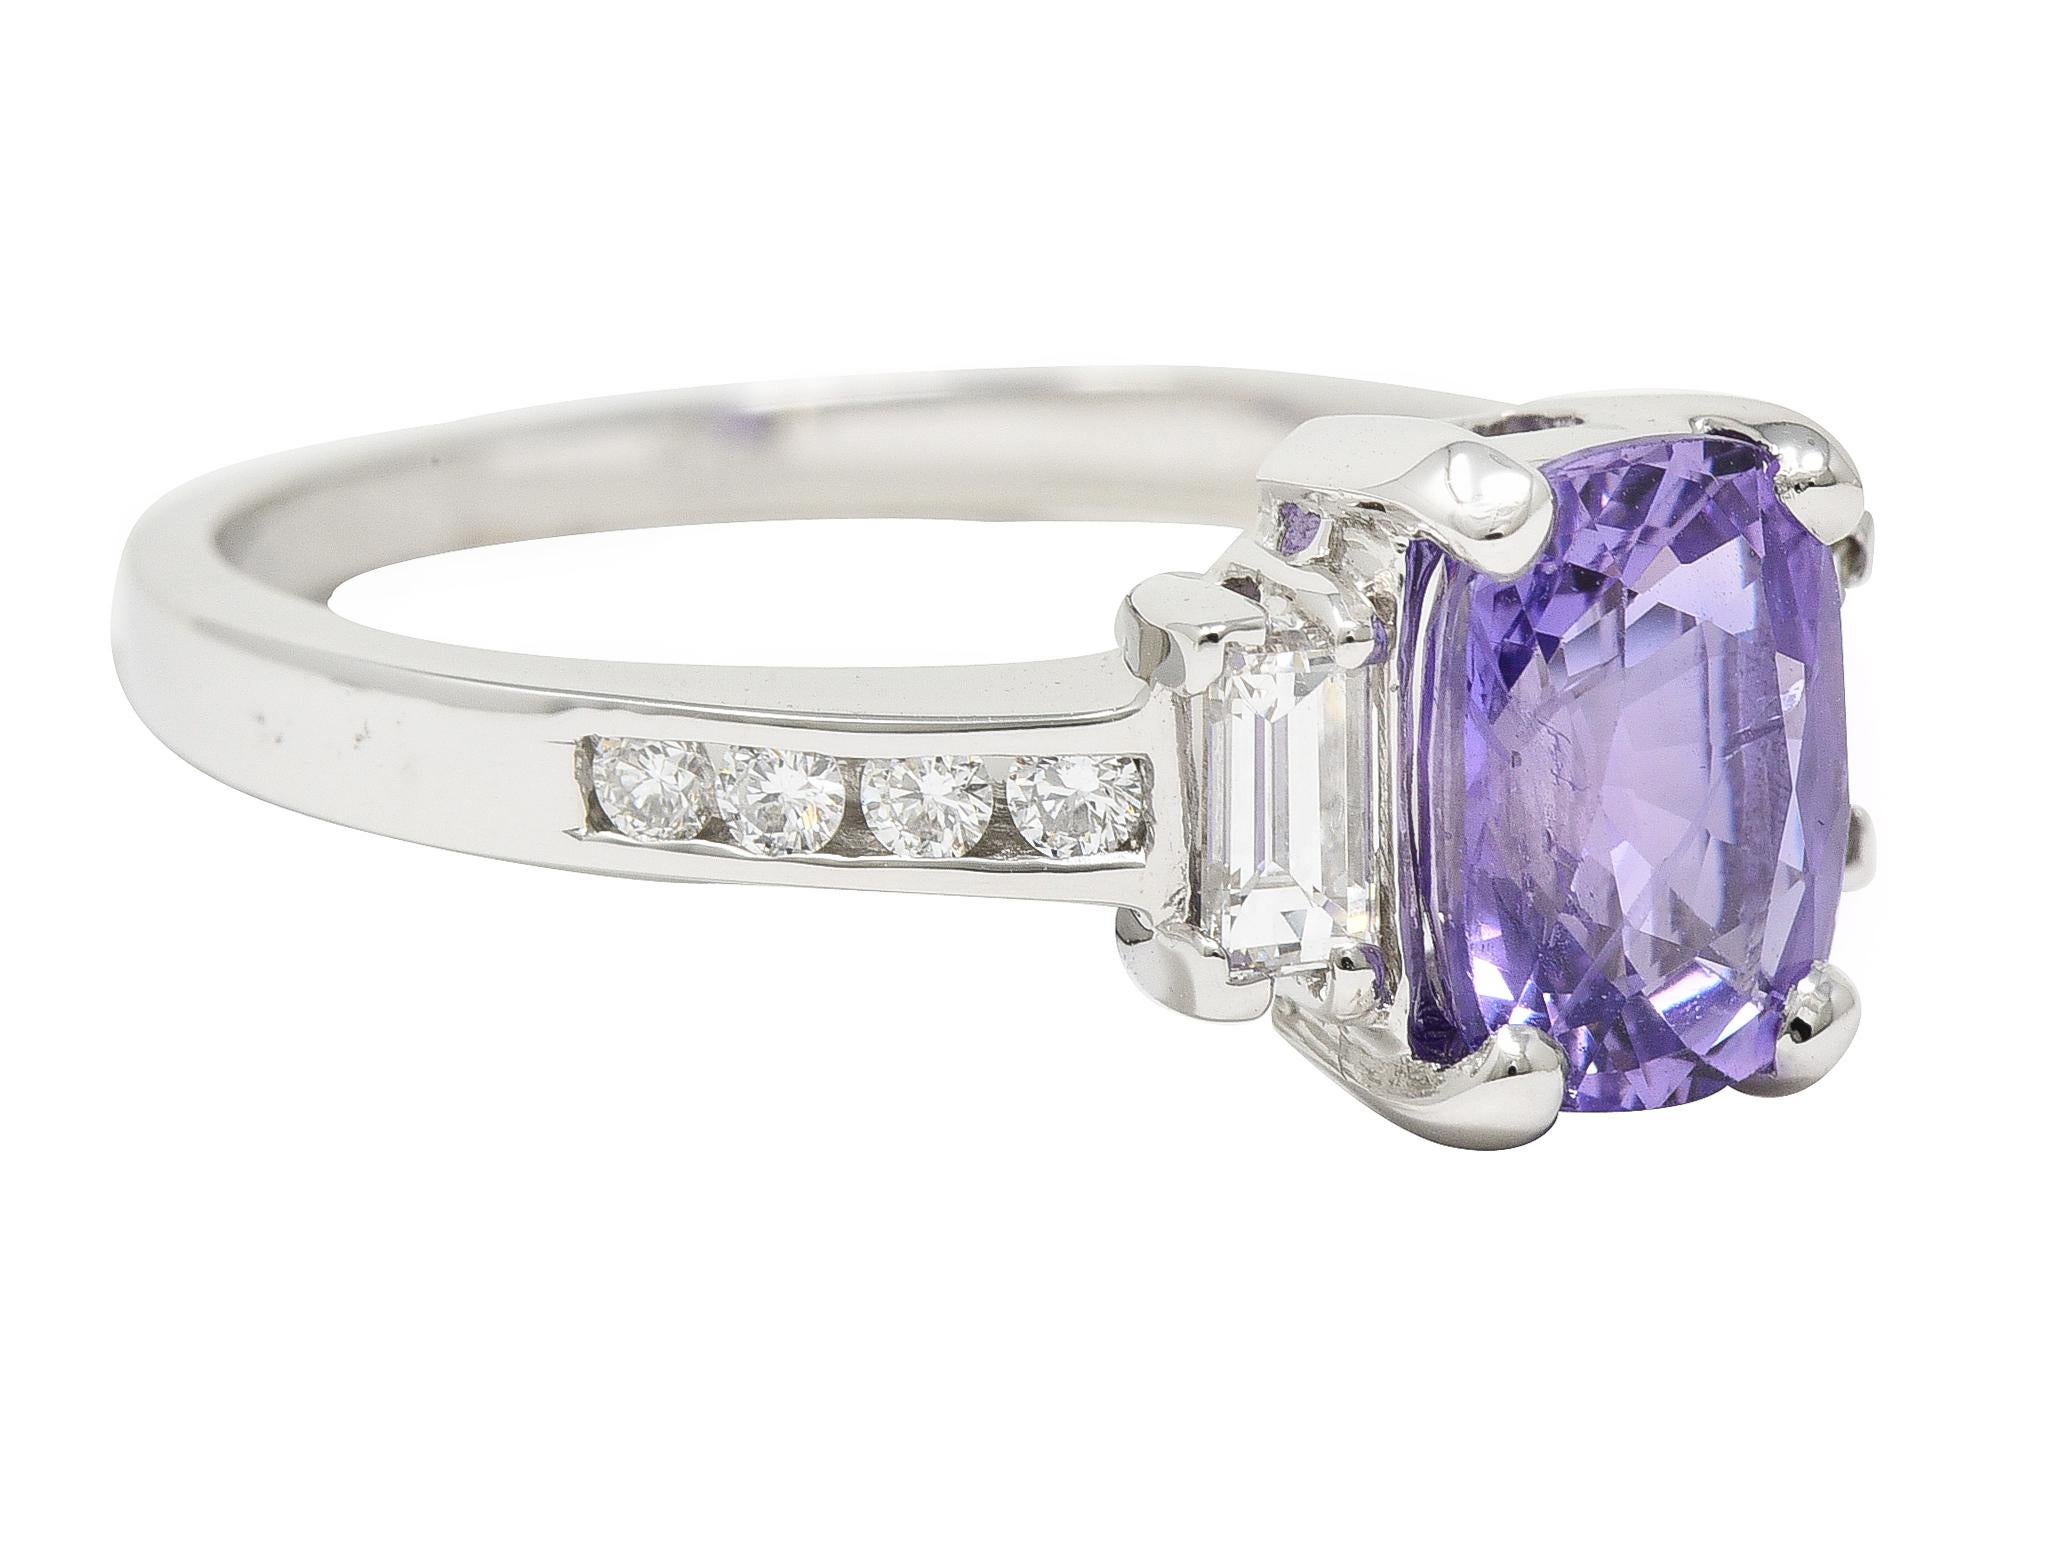 Centering a rectangular cushion cut sapphire weighing 2.68 carats
Natural Sri Lankan in origin with no indications of heat treatment
Transparent light pinkish-purple in color - prong set in basket
Flanked by prong set baguette cut diamonds
With